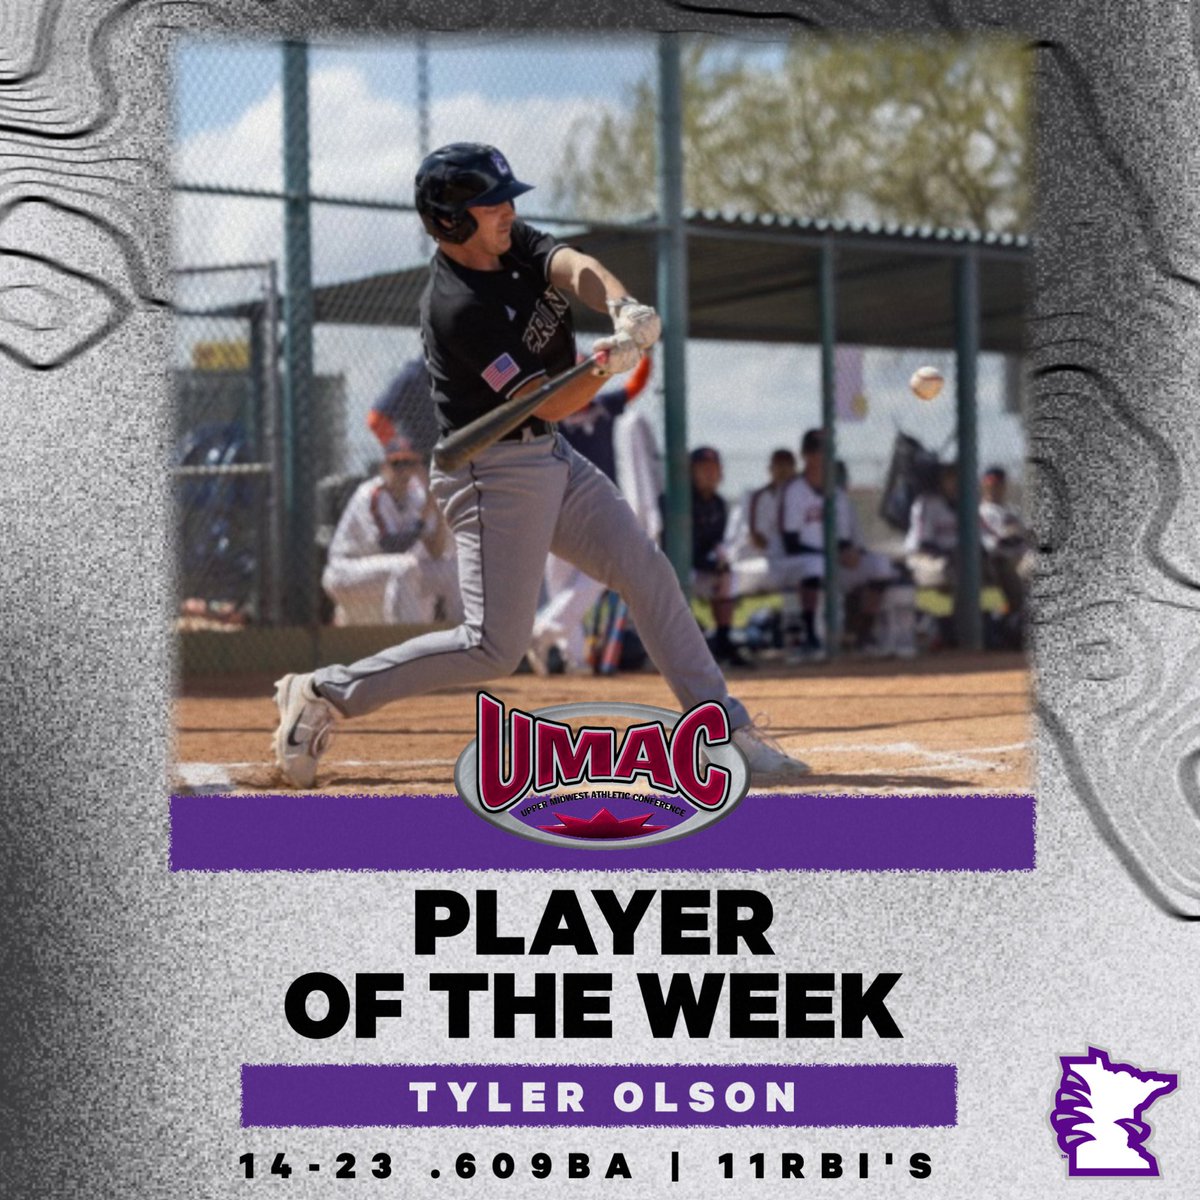 🚨Tyler Olson 🚨 Olson received his first UMAC player of the week nomination after an incredible week at the plate 14-23 | .609BA | 11RBI’s 🐻‍❄️🧊